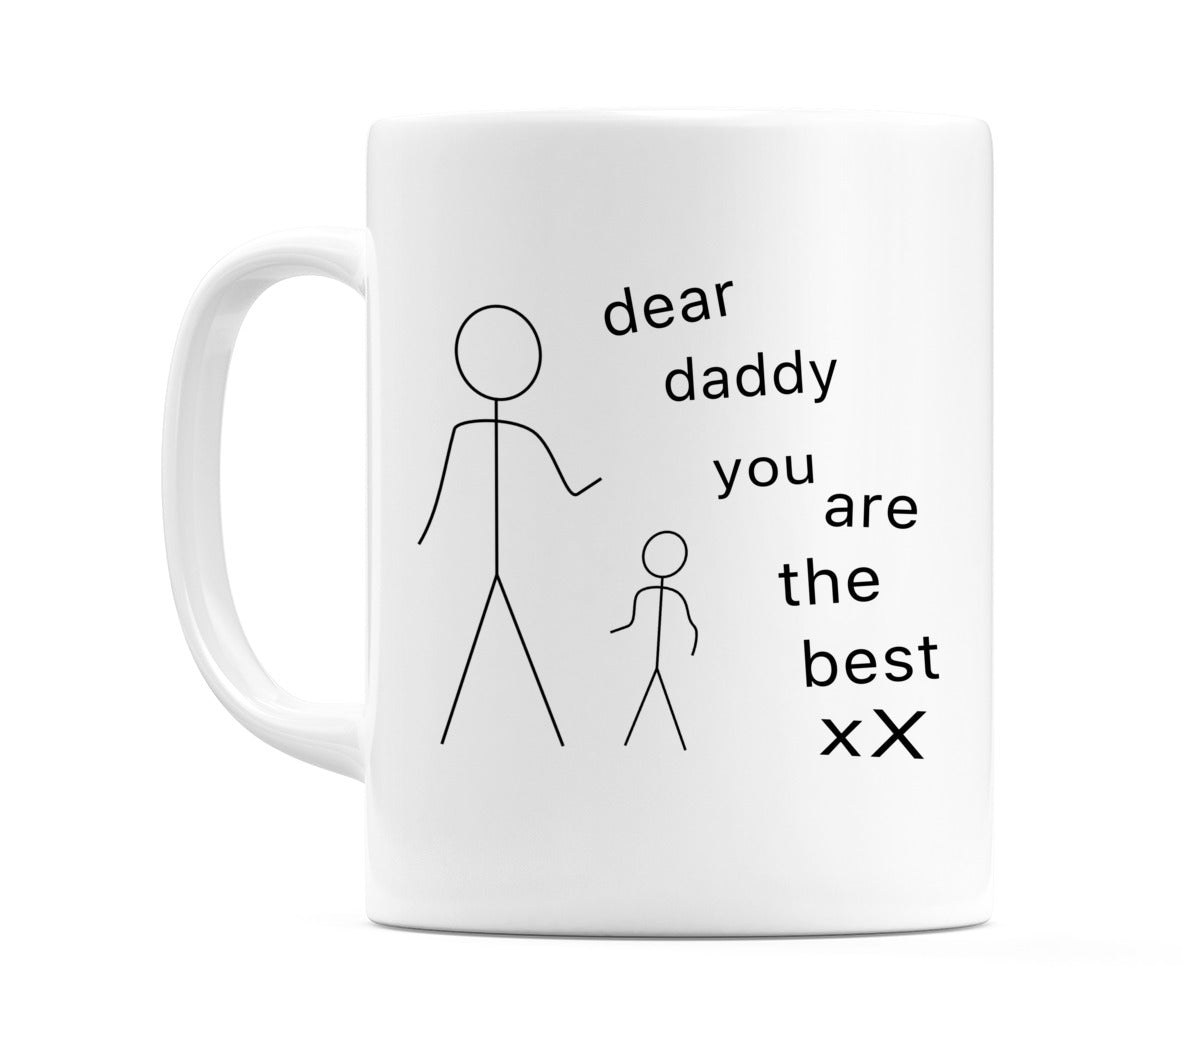 The right side of this mug has a White Coffee Mug With A Stick Figure And A Text That Says Dear Daddy You Are The Best X.